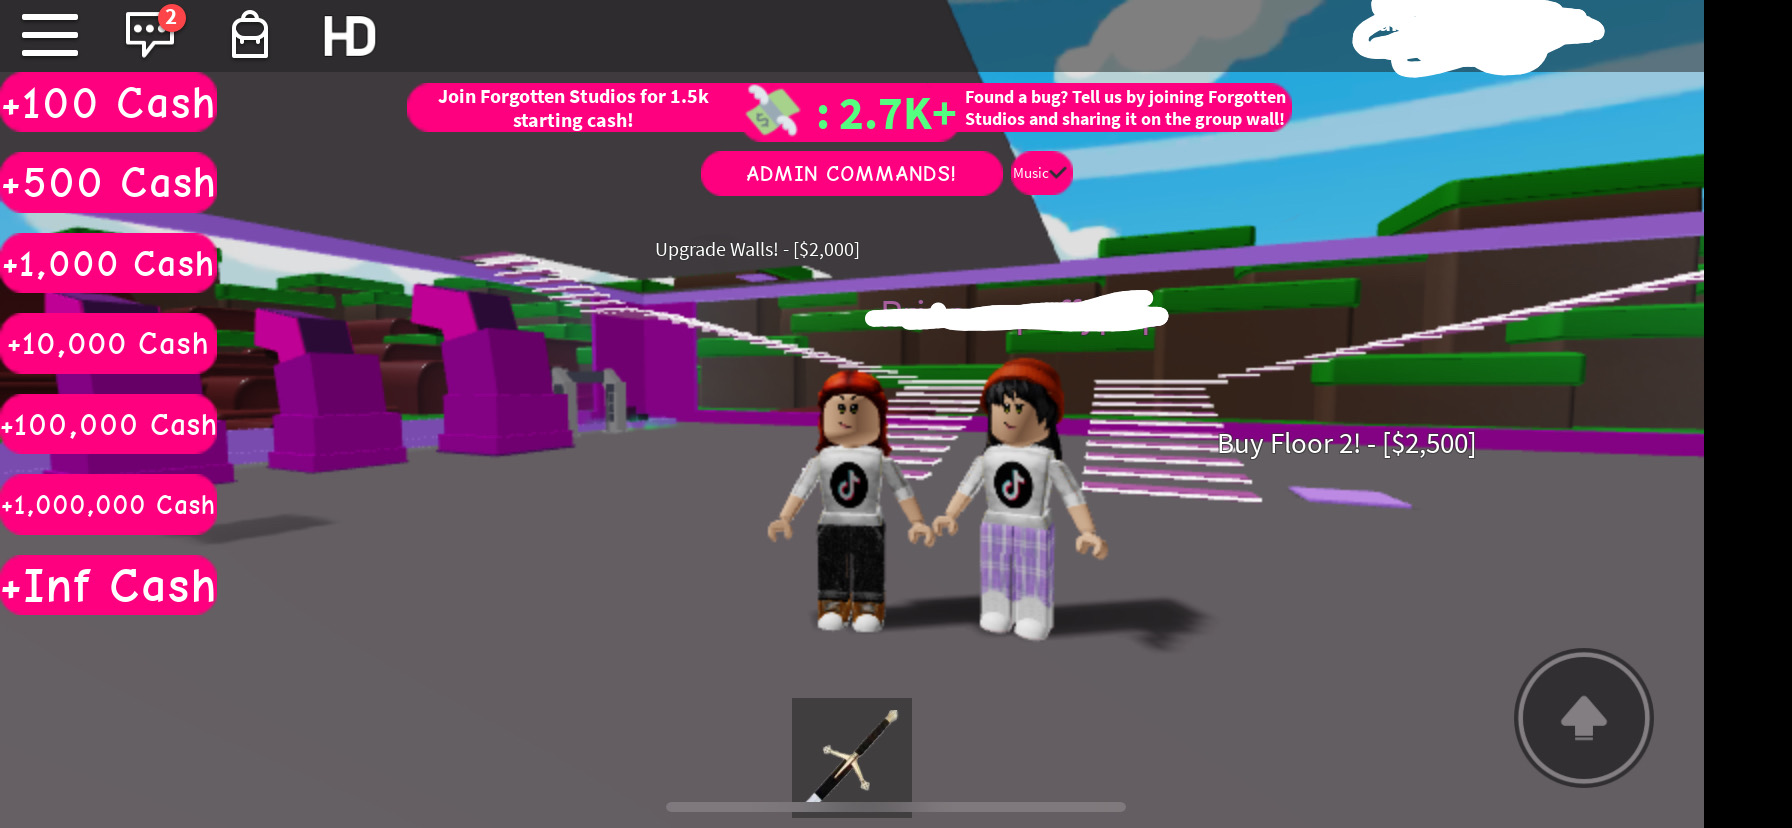 Roblox Tiktok Playing Roblox With Image By Shaaned222 - roblox tik tok